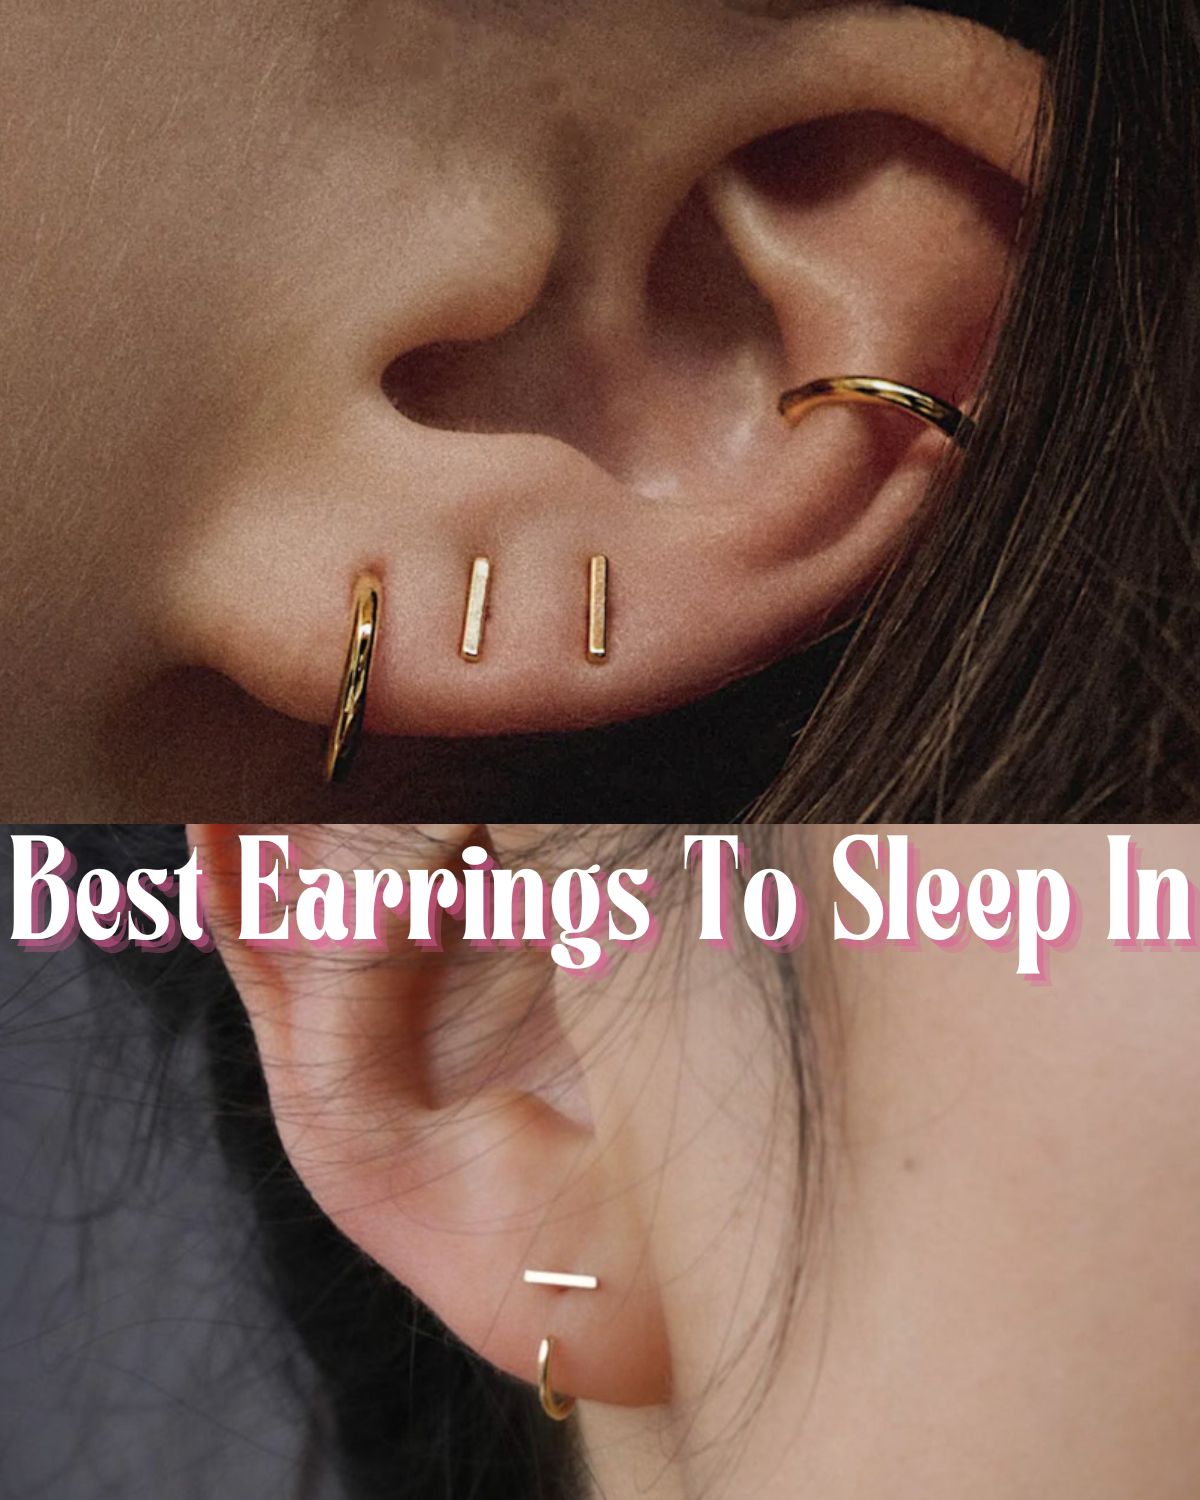 Two girls with comfortable earrings in